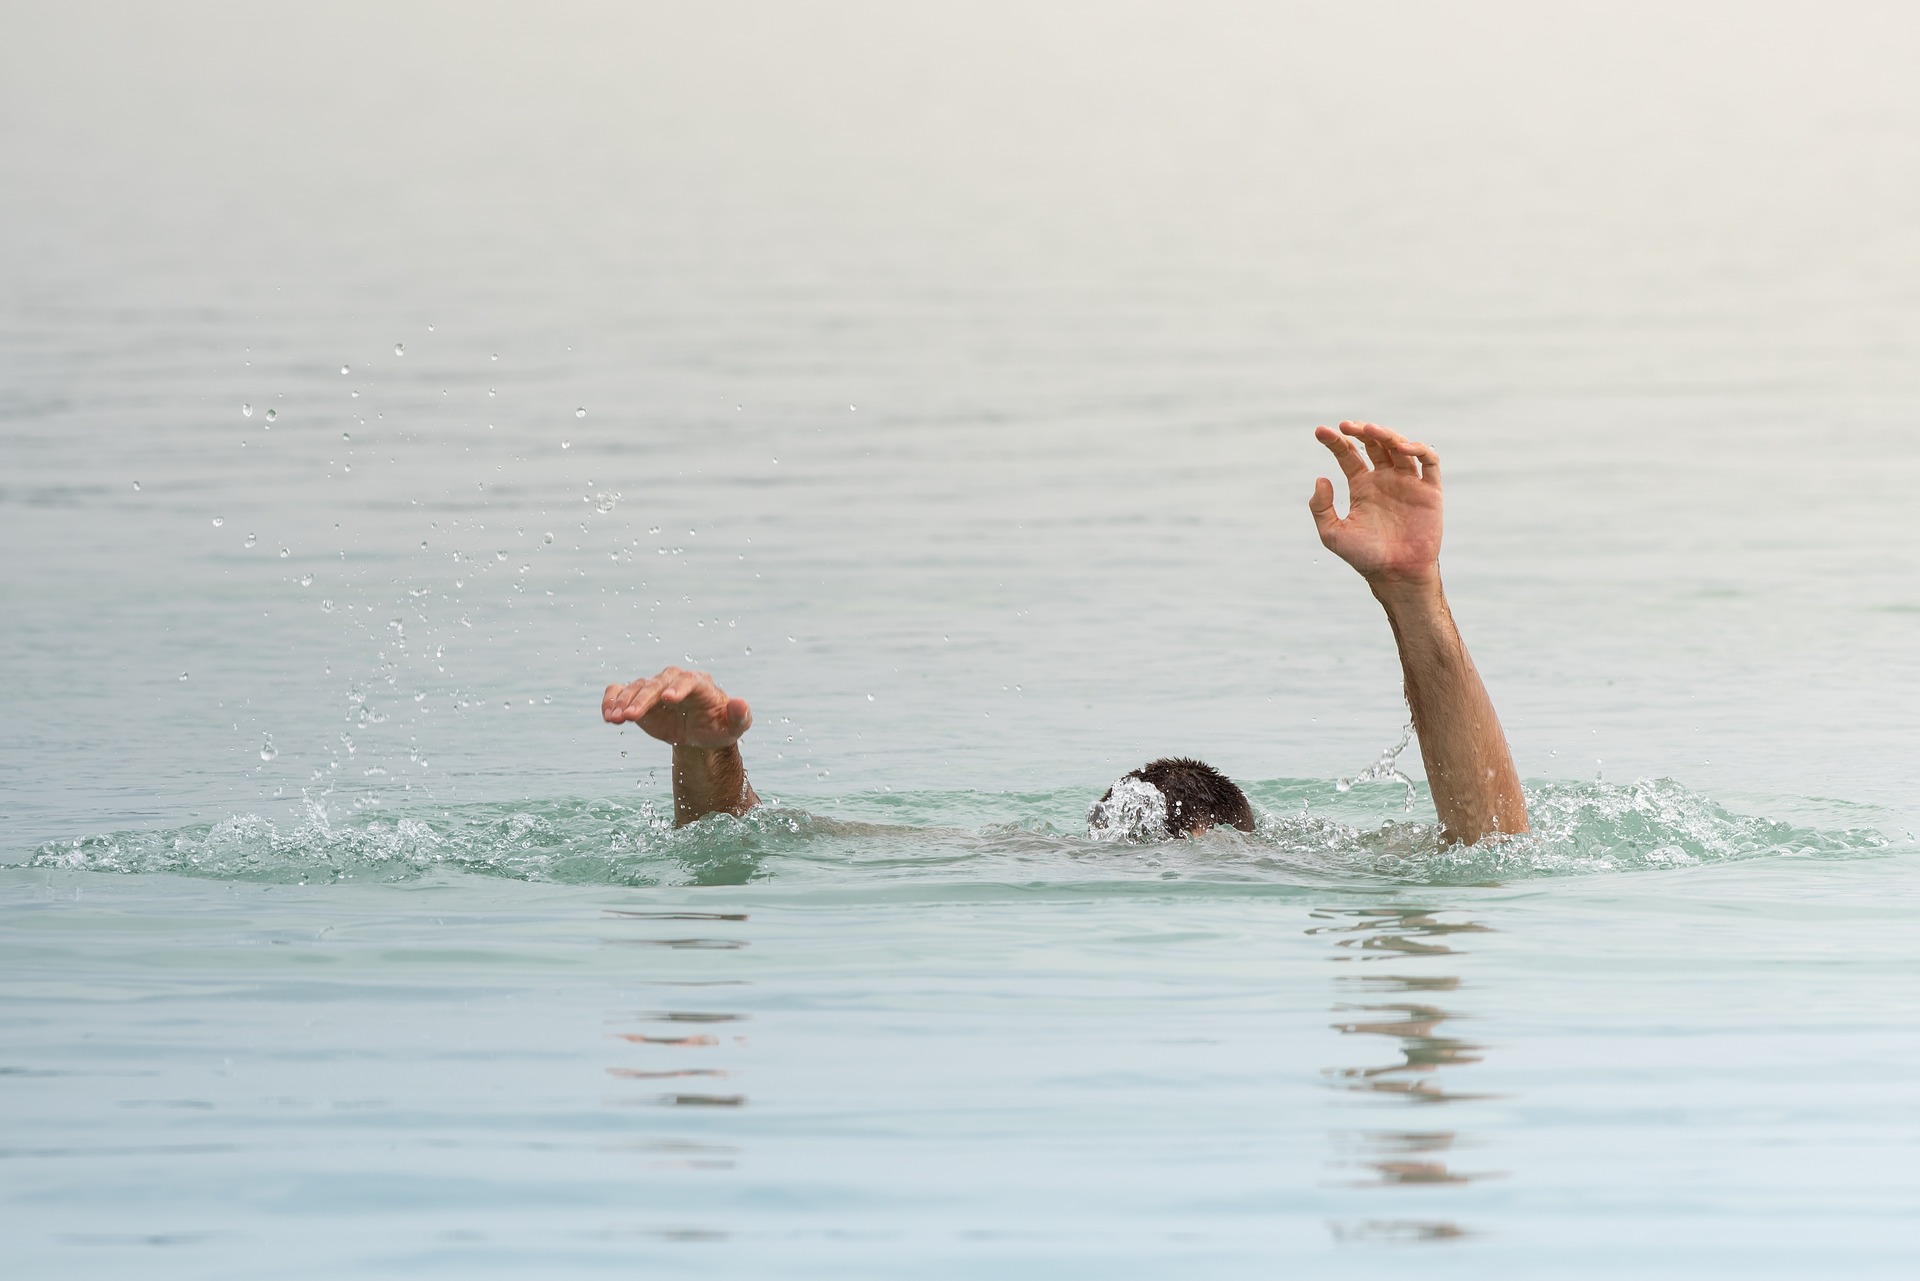 Image by Eszter Miller from Pixabay drown drowning-related deaths